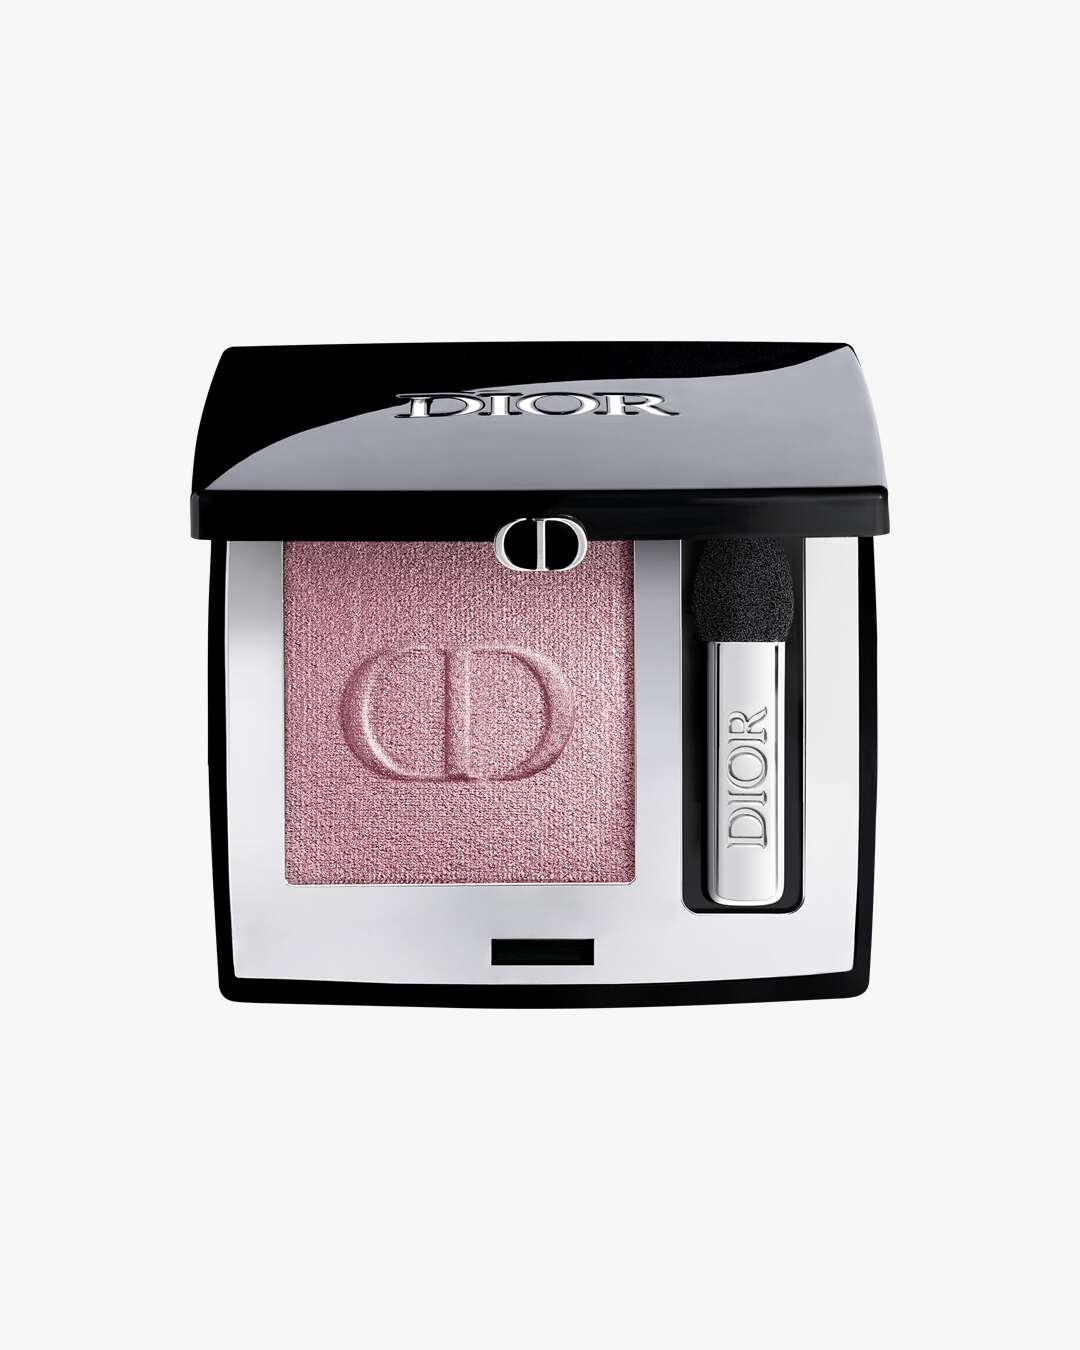 Bilde av Diorshow Mono Couleur High-color And Long-wear Eyeshadow 2 G (farge: 755 Rose Tulle)